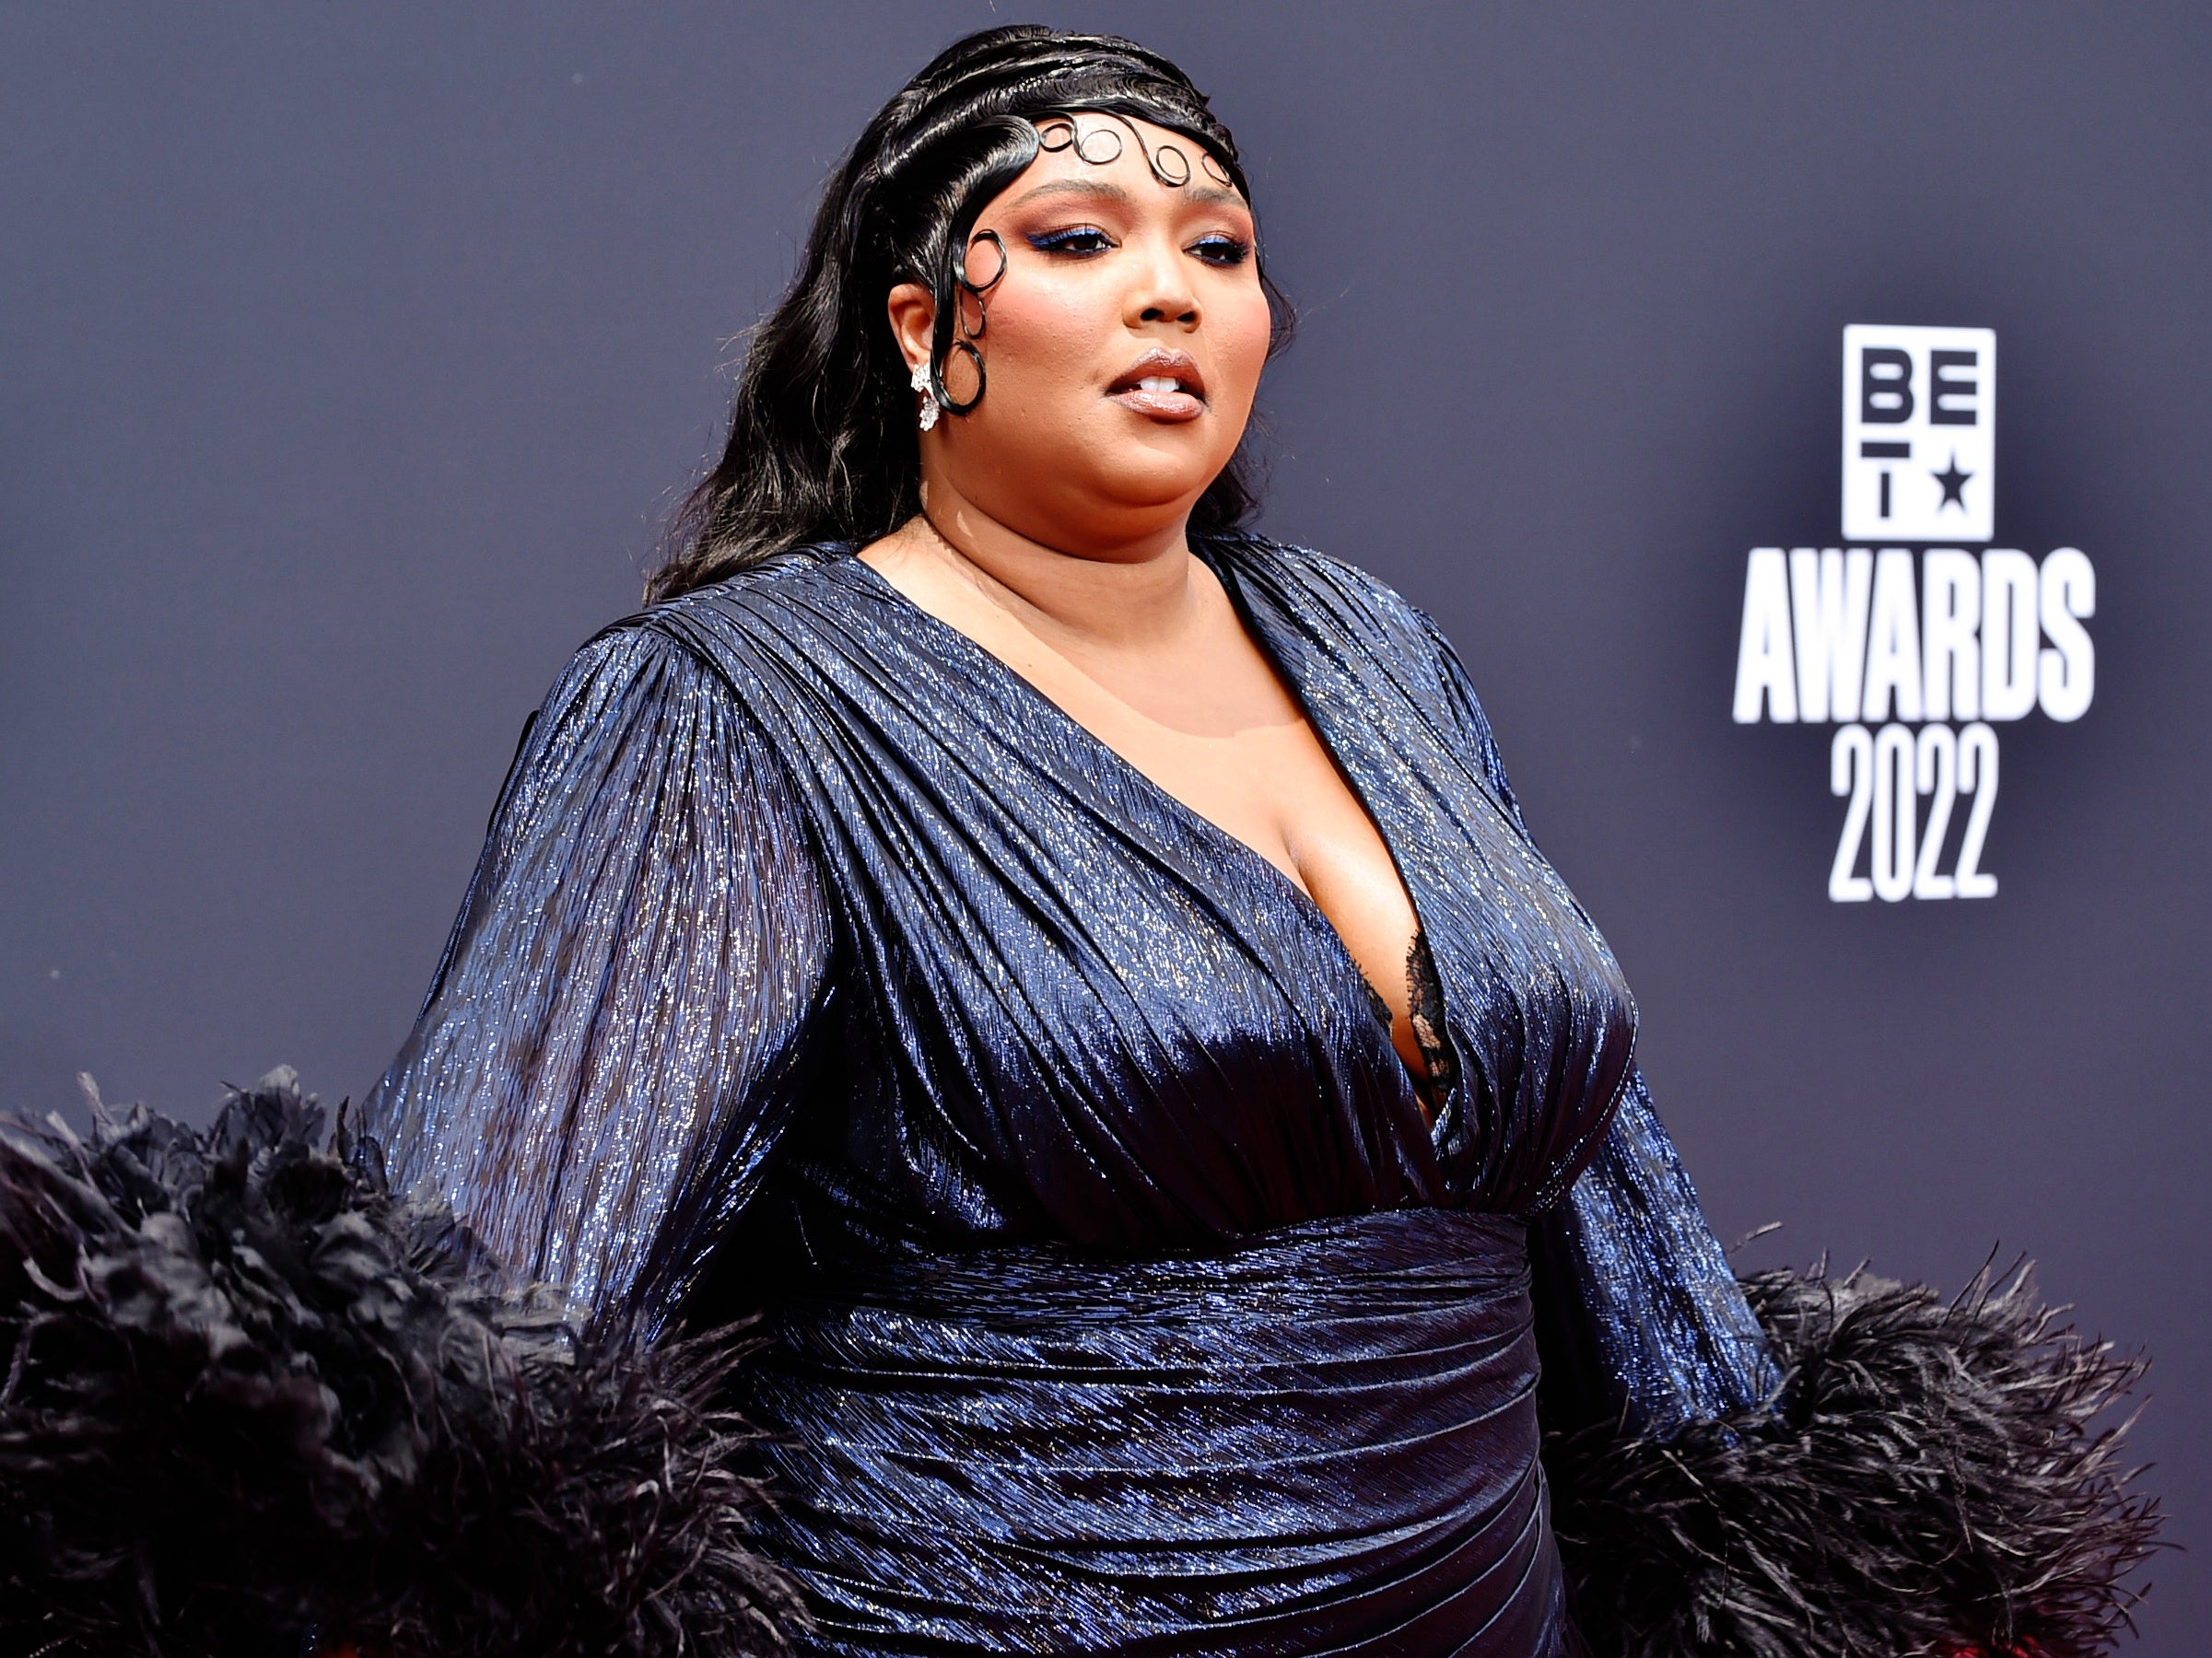 10 Things We Learned From 'Love, Lizzo